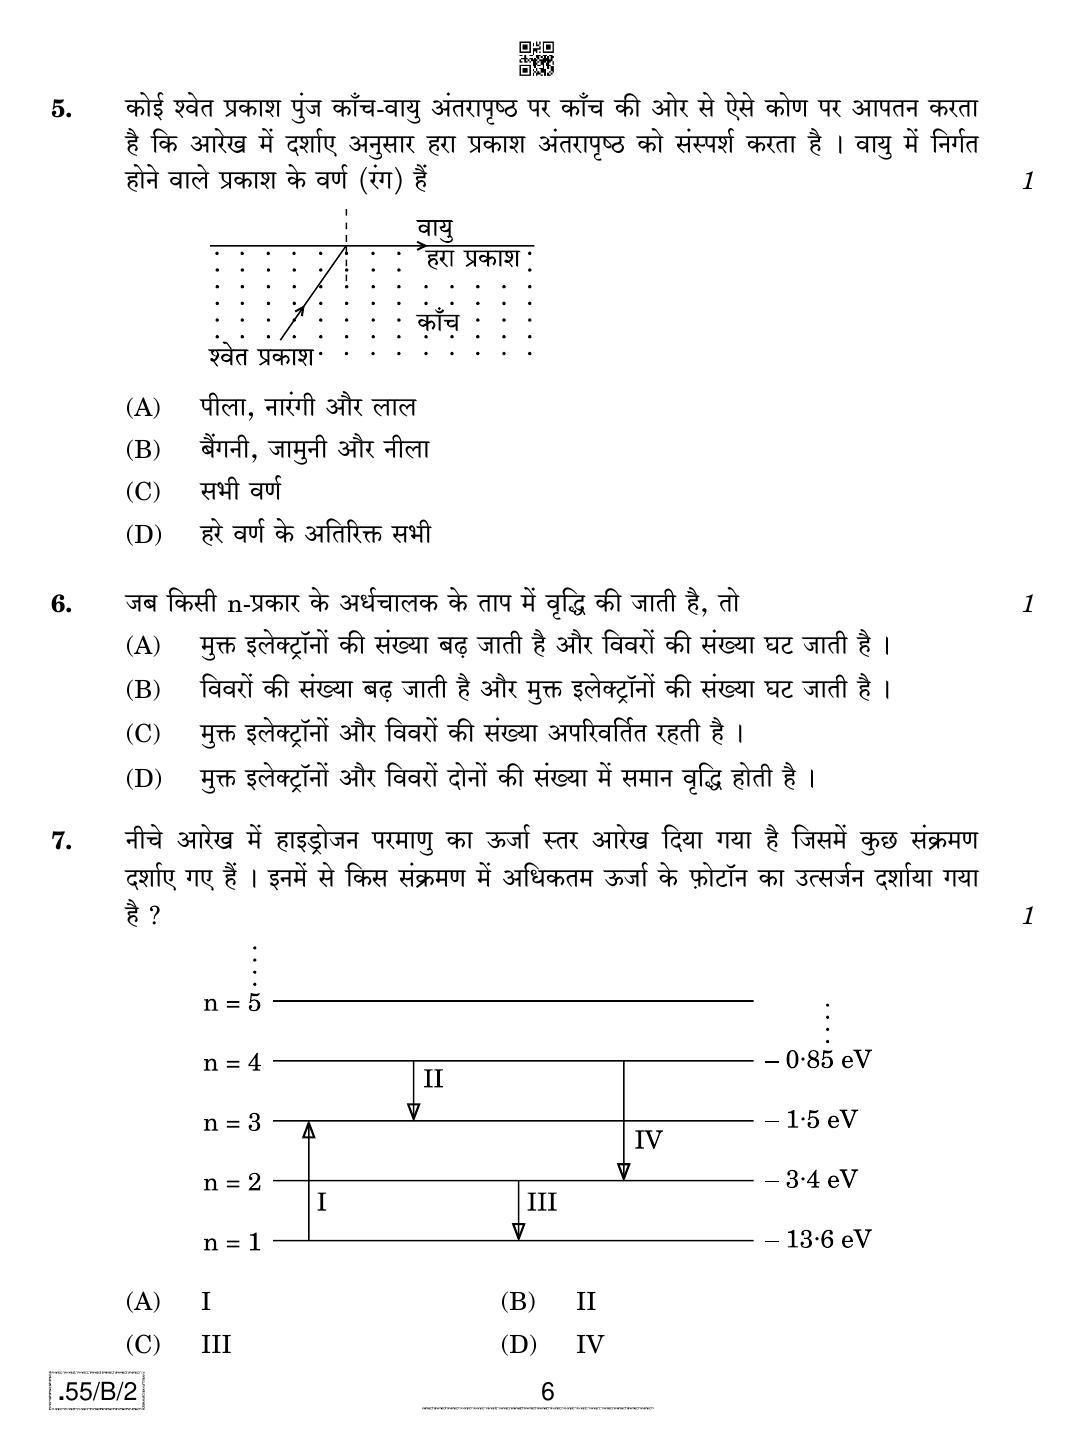 CBSE Class 12 55-C-2 - Physics 2020 Compartment Question Paper - Page 6